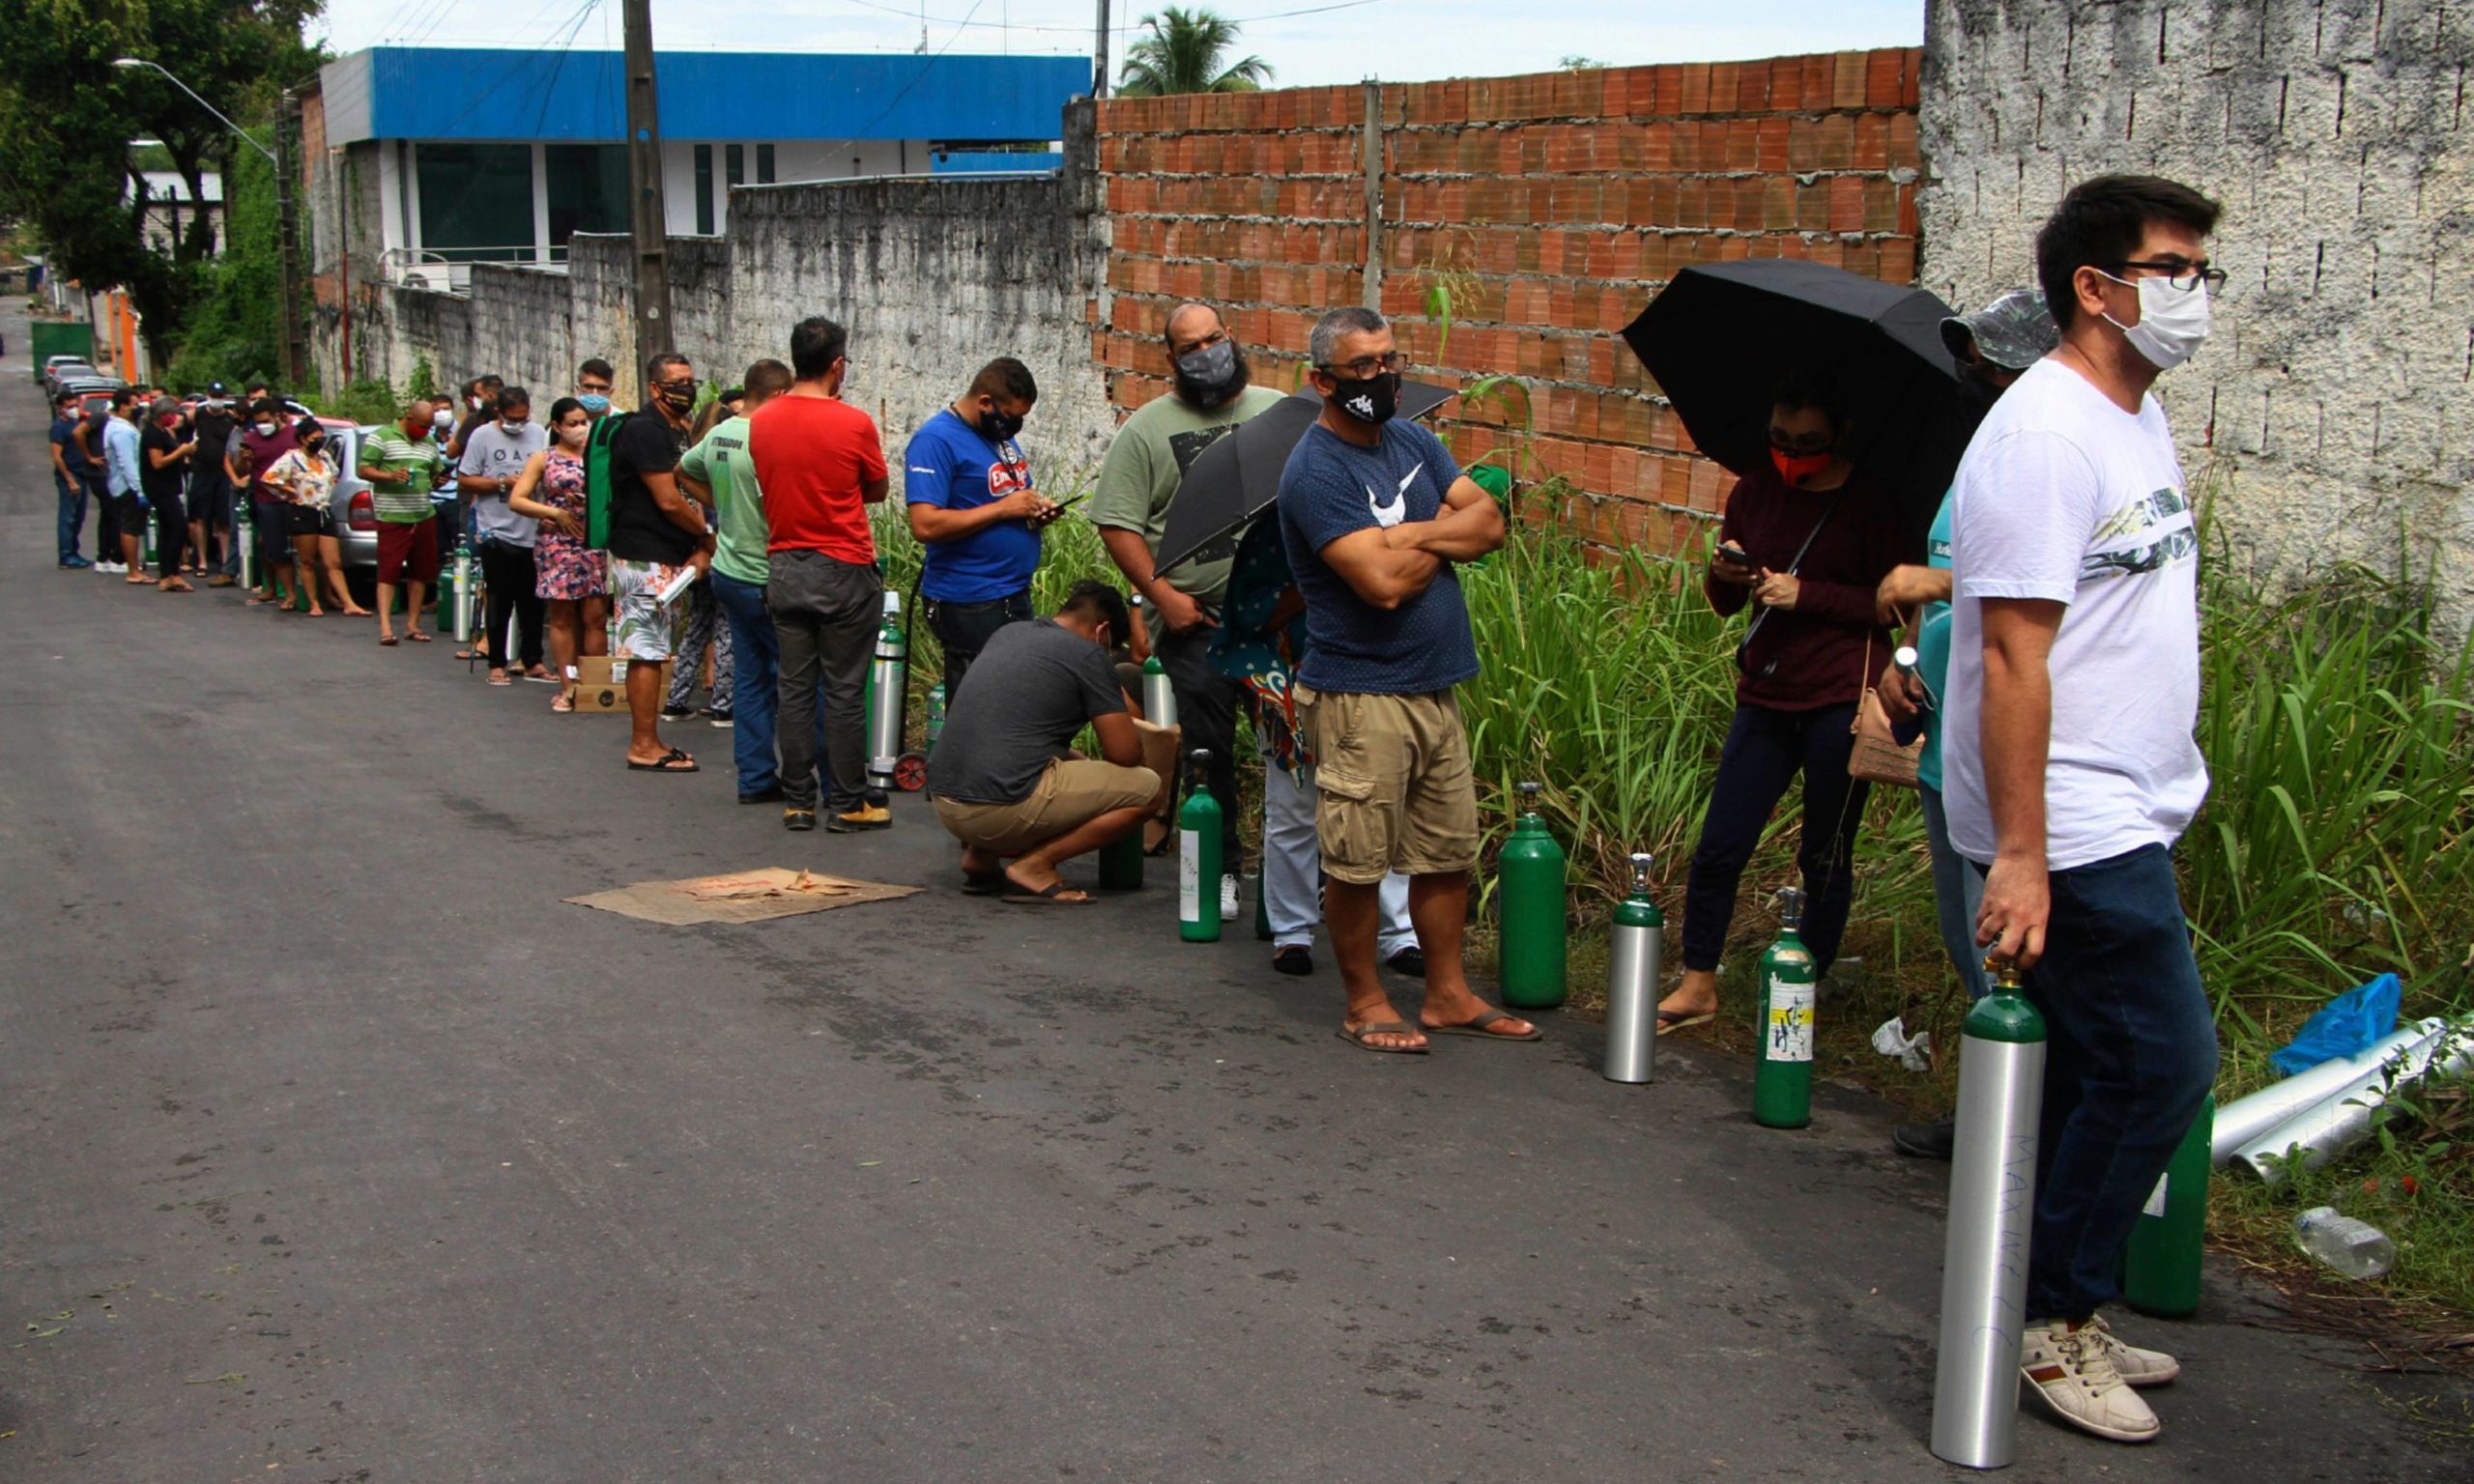 Family members of patients hospitalized with Covid-19 line up with empty oxygen tanks in an attempt to refill them, outside the Nitron da Amazonia company, in Manaus, Brazil.